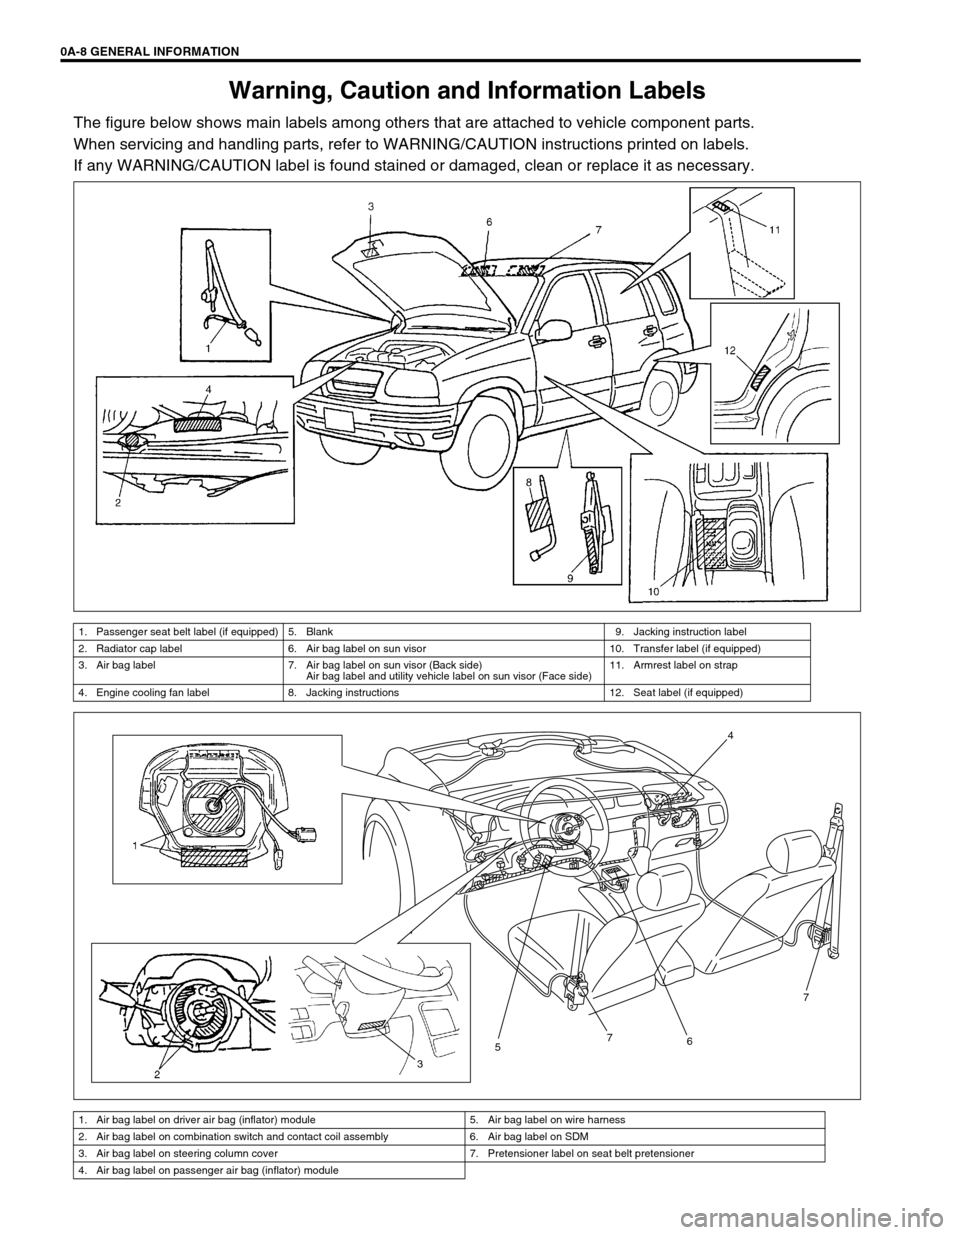 SUZUKI GRAND VITARA 2001 2.G User Guide 0A-8 GENERAL INFORMATION
Warning, Caution and Information Labels
The figure below shows main labels among others that are attached to vehicle component parts.
When servicing and handling parts, refer 